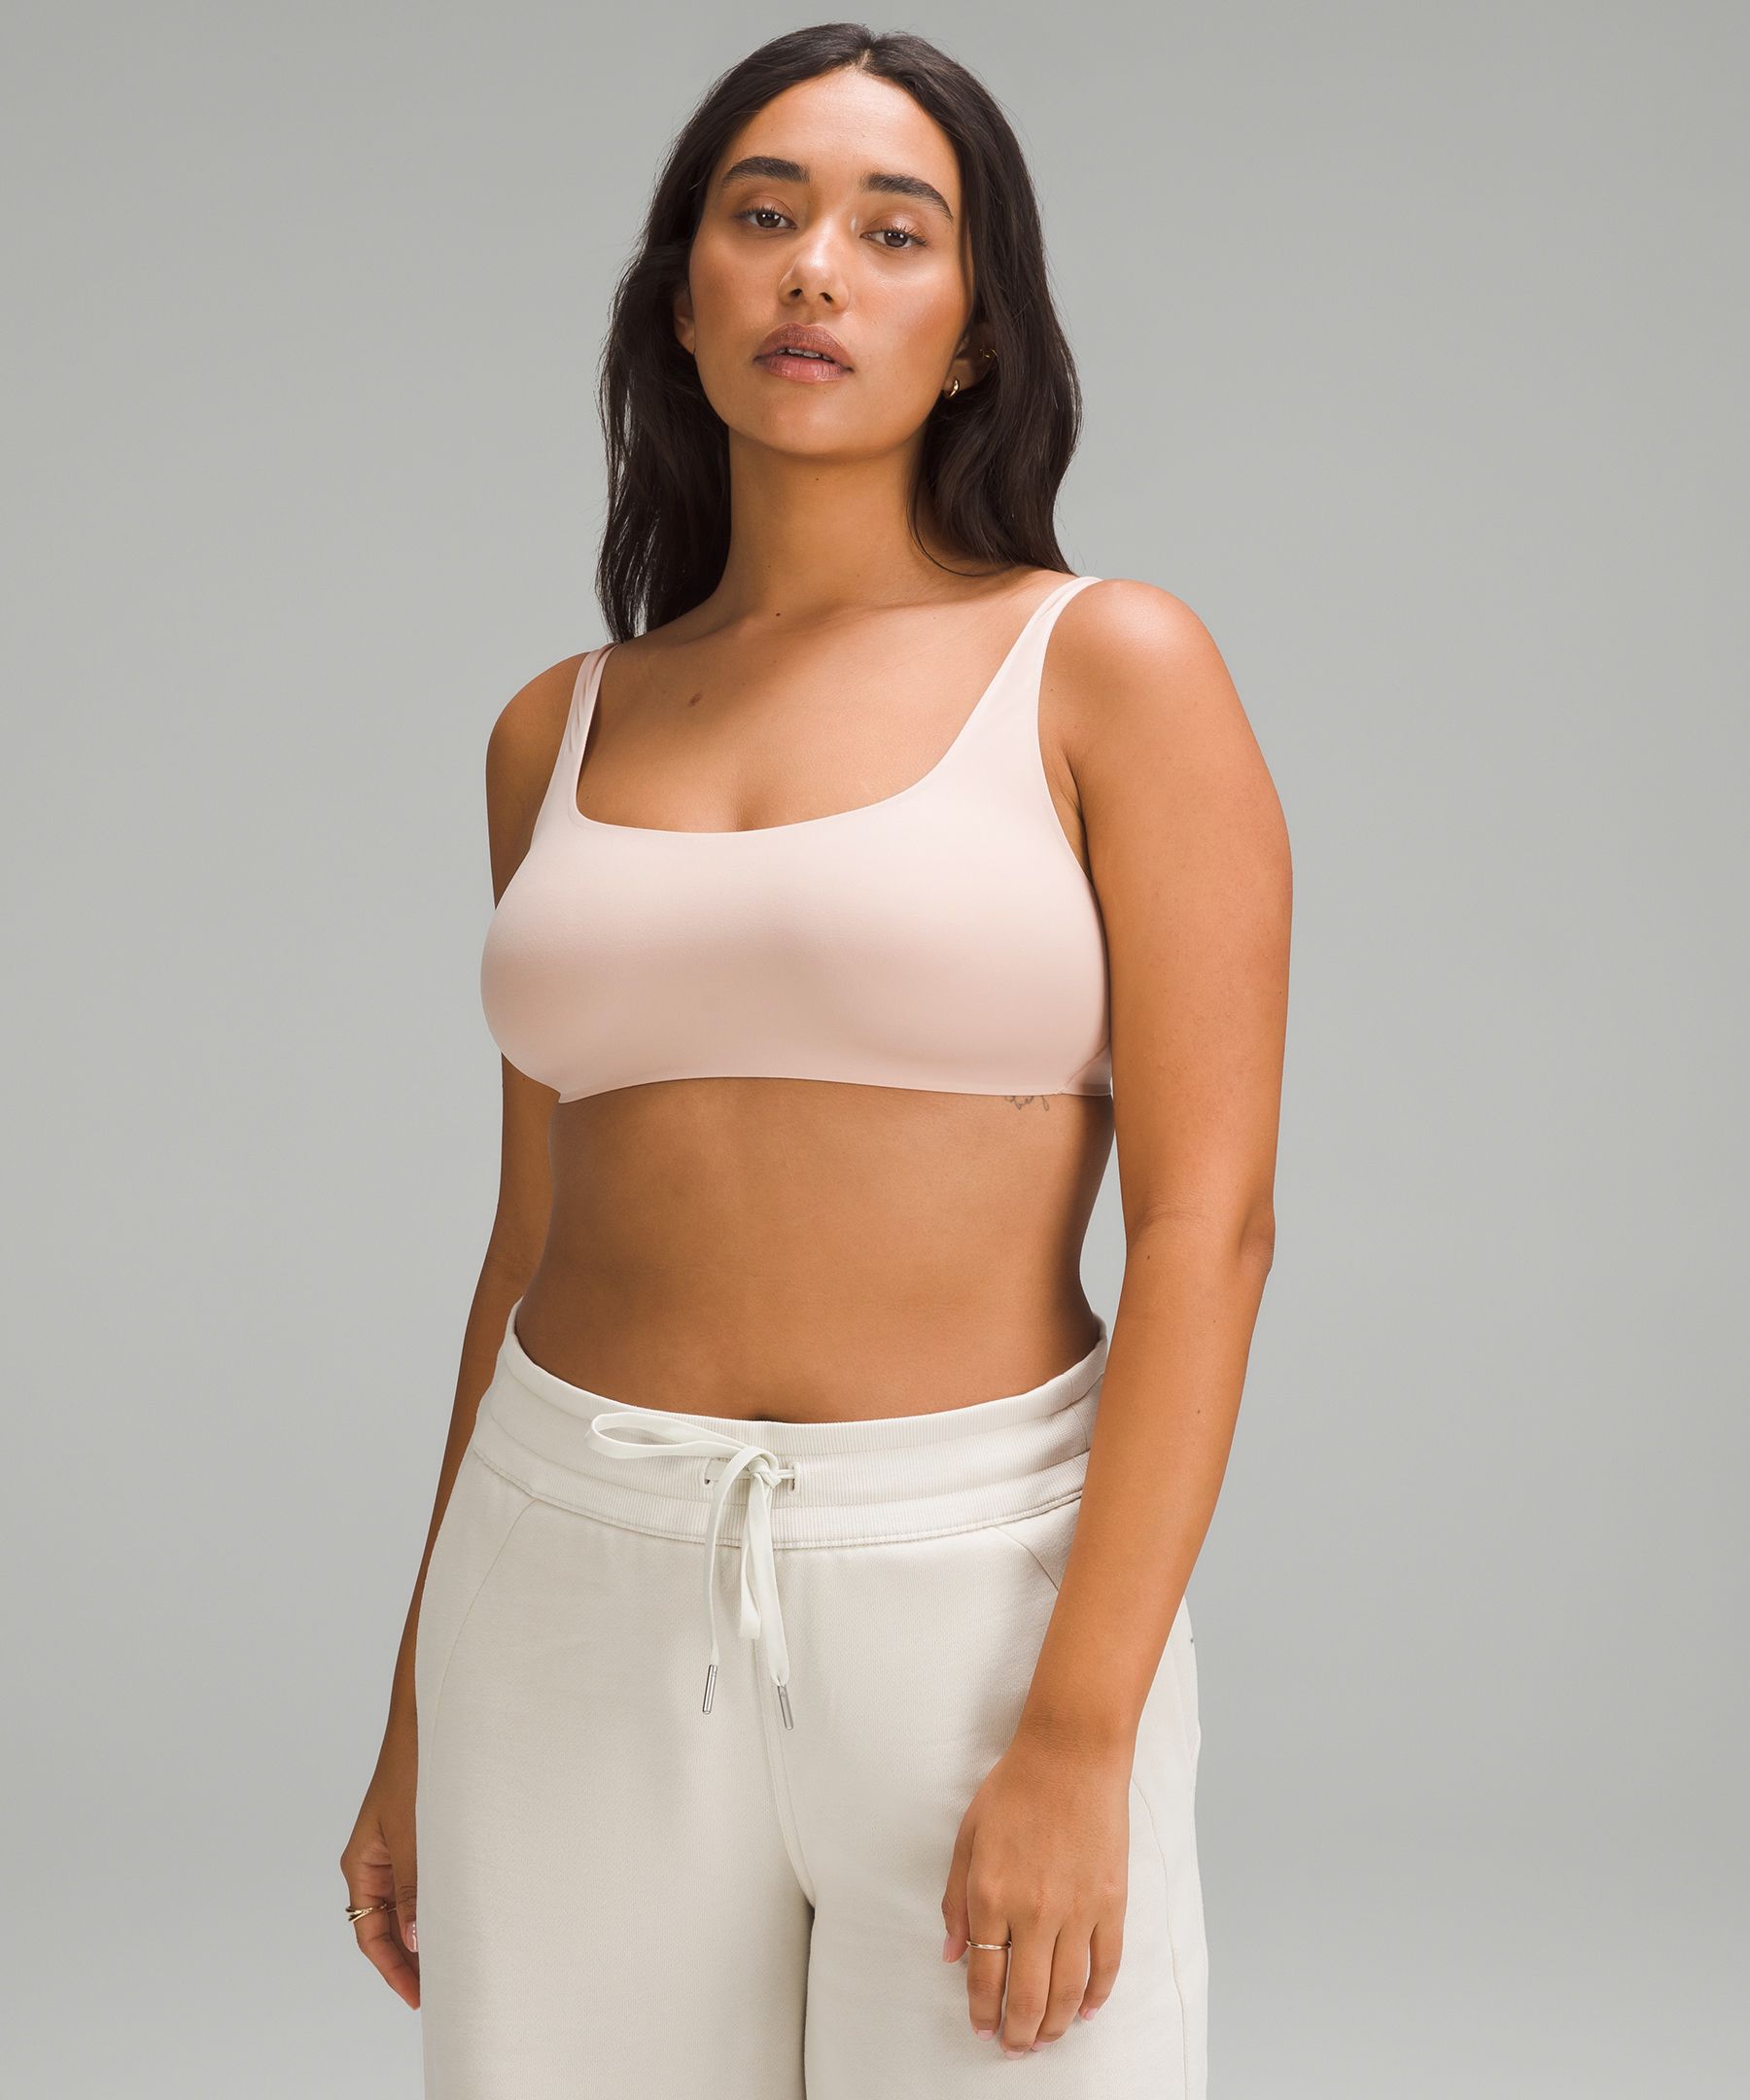 Mulberry Silk Wireless Padded Bralette For Women Super Soft, Lightweight,  And Comfortable Deep V Neck Gym Shirts Women For Everyday Wear From  Shutiaoo, $19.7